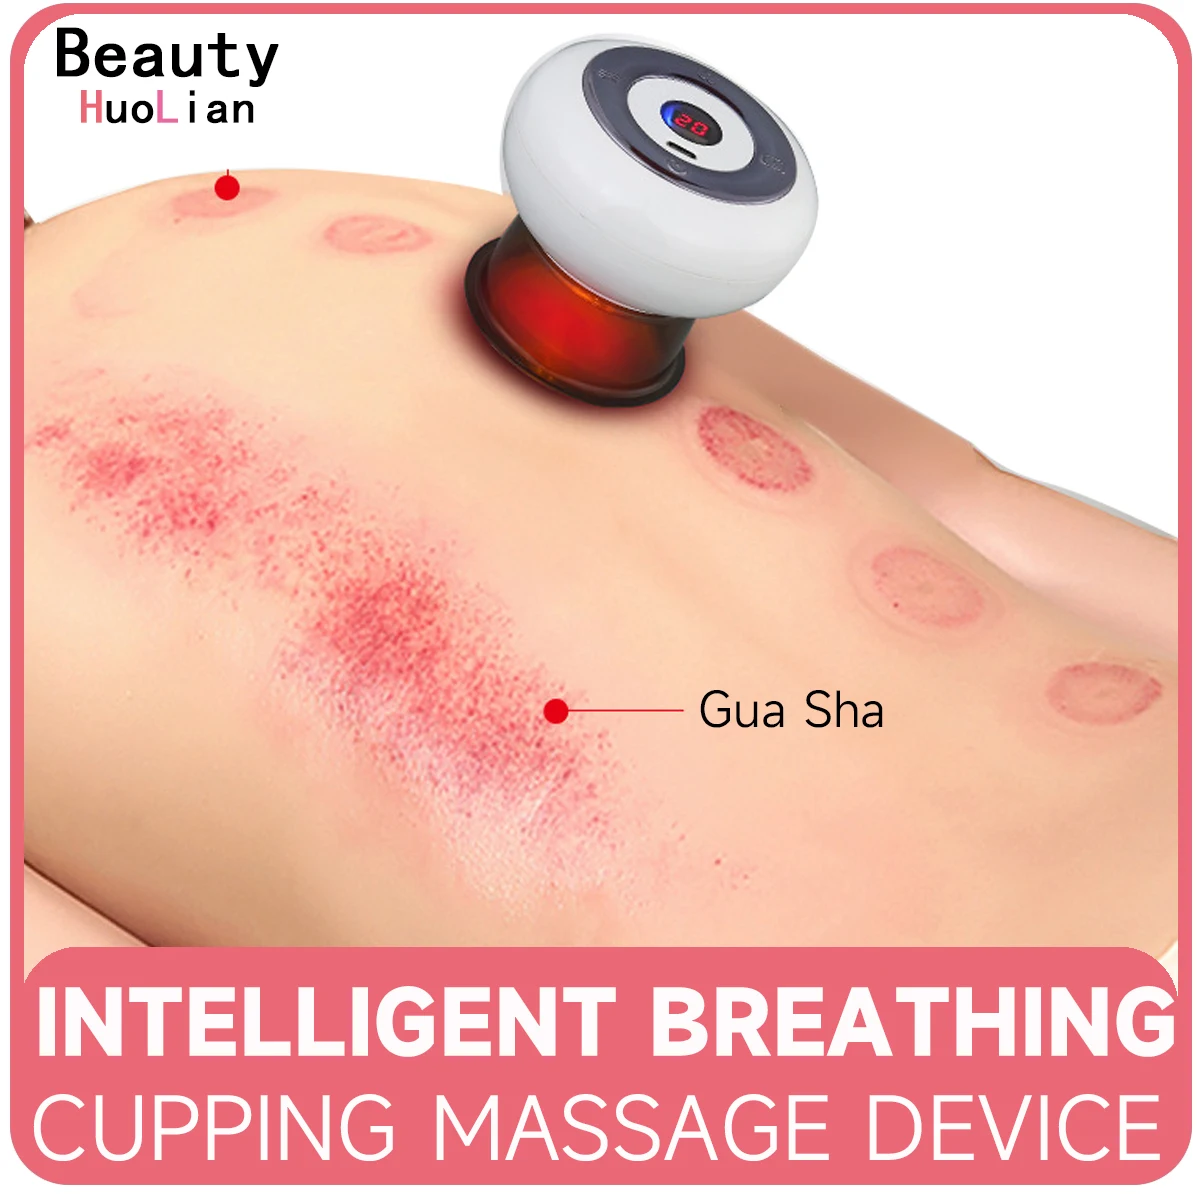 

Electric Intelligent Breathing Vacuum Cupping Device 3 Gears LED Smart Meridian Guasha Tool Massage Cupping Heat Therapy